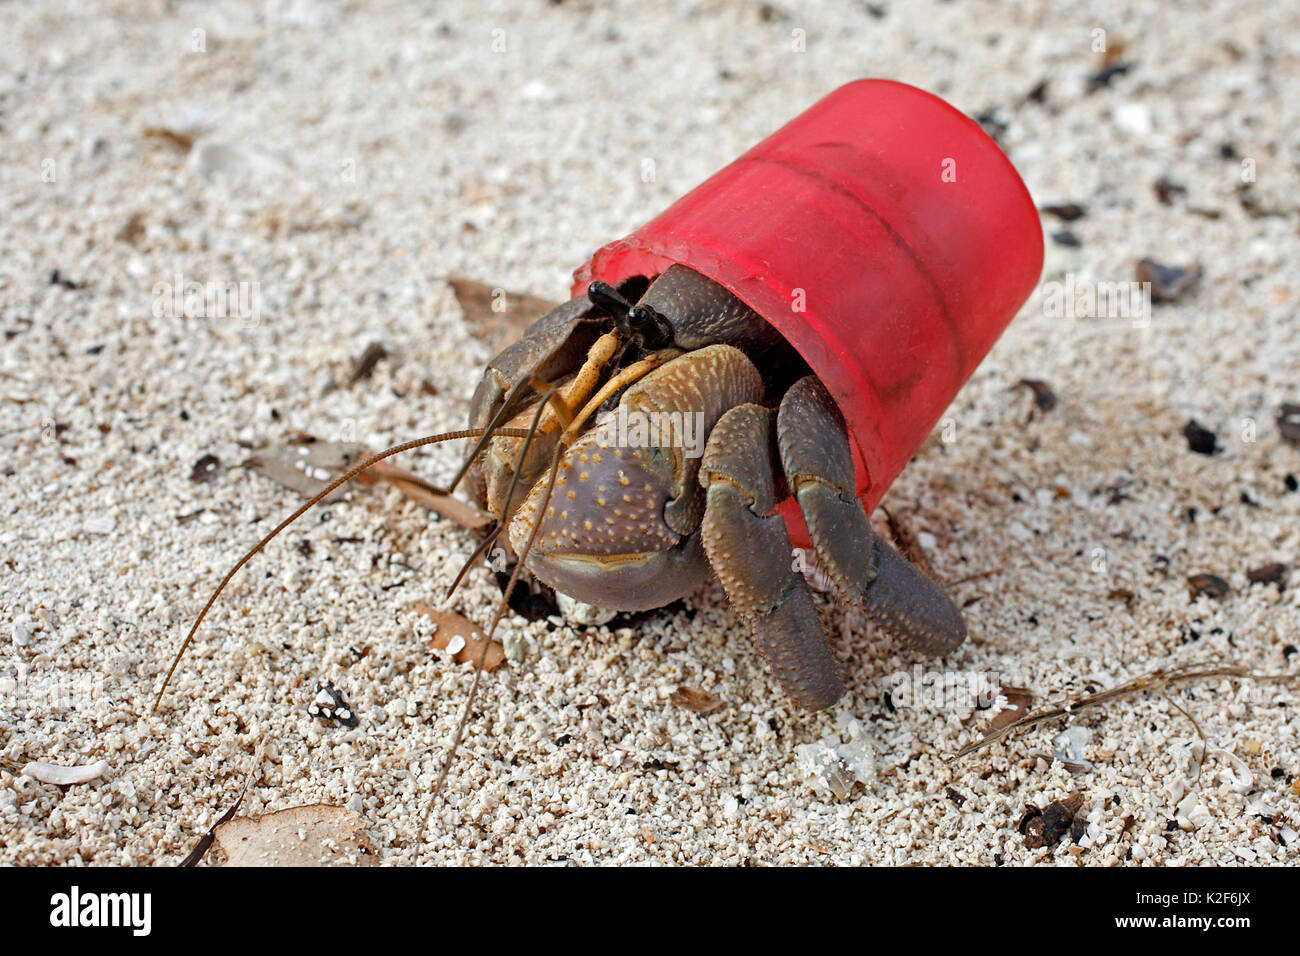 Terrestrial Hermit crab, Coenobita brevimanus, using a red bottle cap as a protective shell instead of the usual mollusk shell. Stock Photo